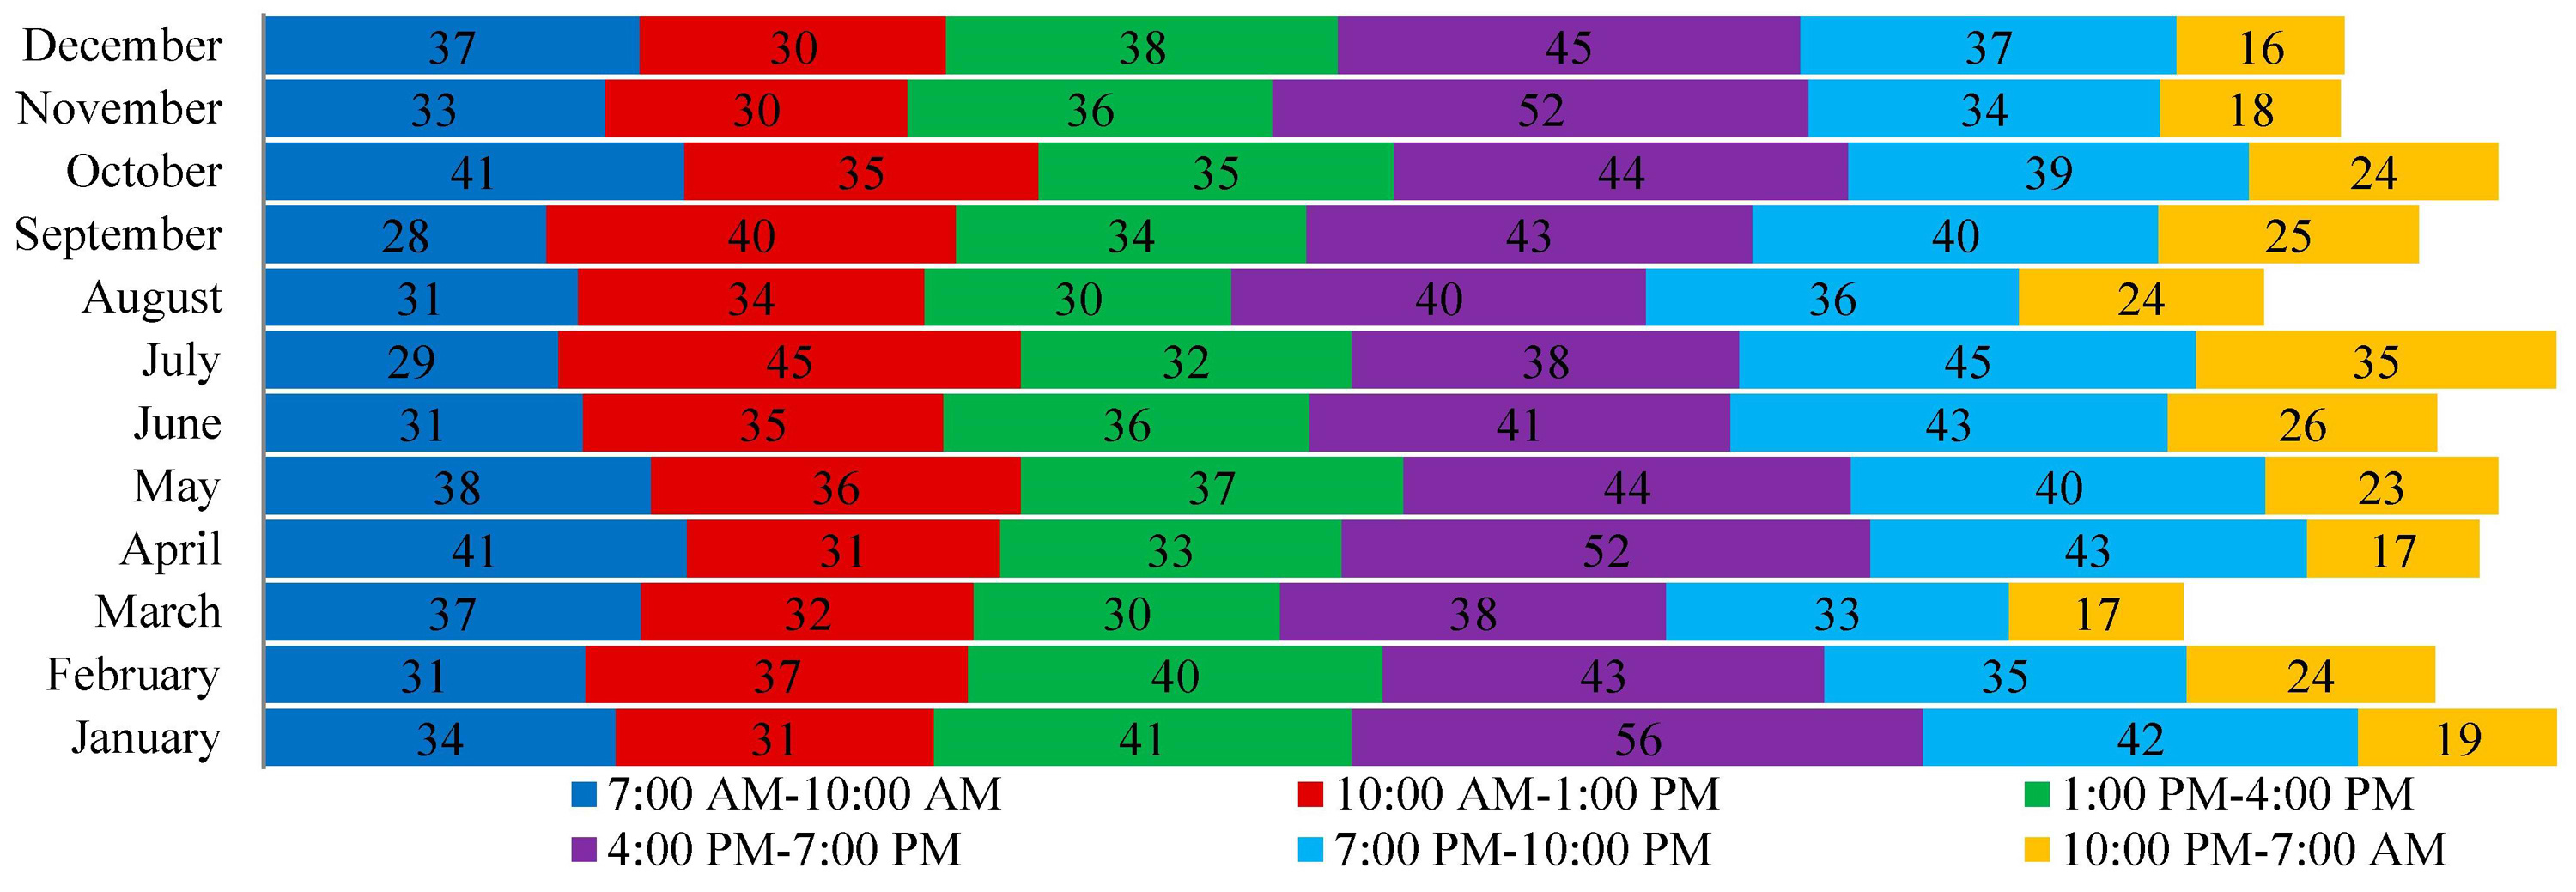 The average occupants’ traffic histogram of 9 floors buildings; they were passing through the doorway of the first floor, within 3-hour time intervals, starting from 7:00 AM to 10:00 PM and 9 hours interval from 10:00 PM to 07:00 AM.